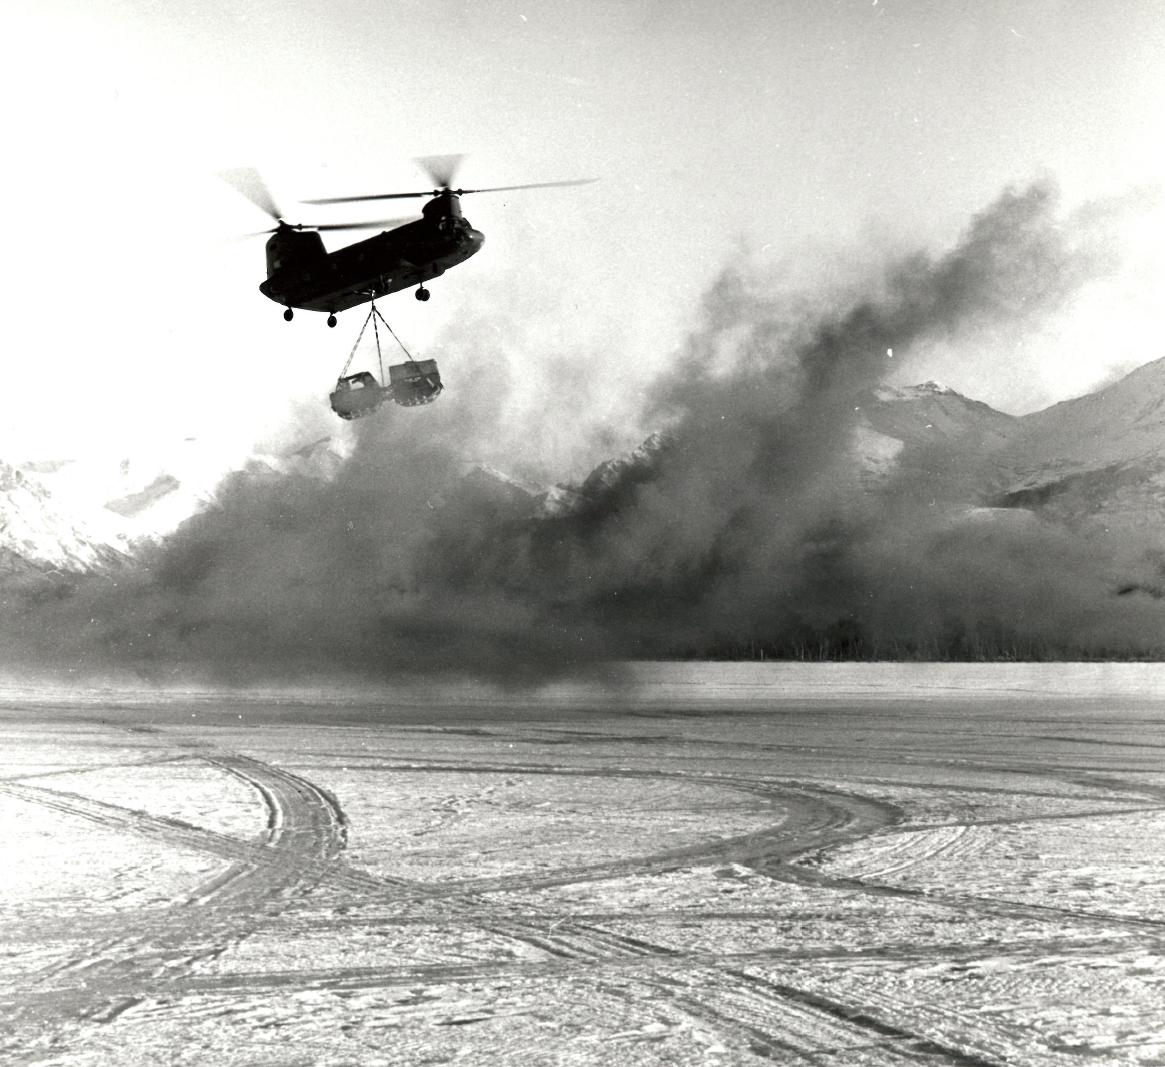 a helicopter flying above an icy lake on skis